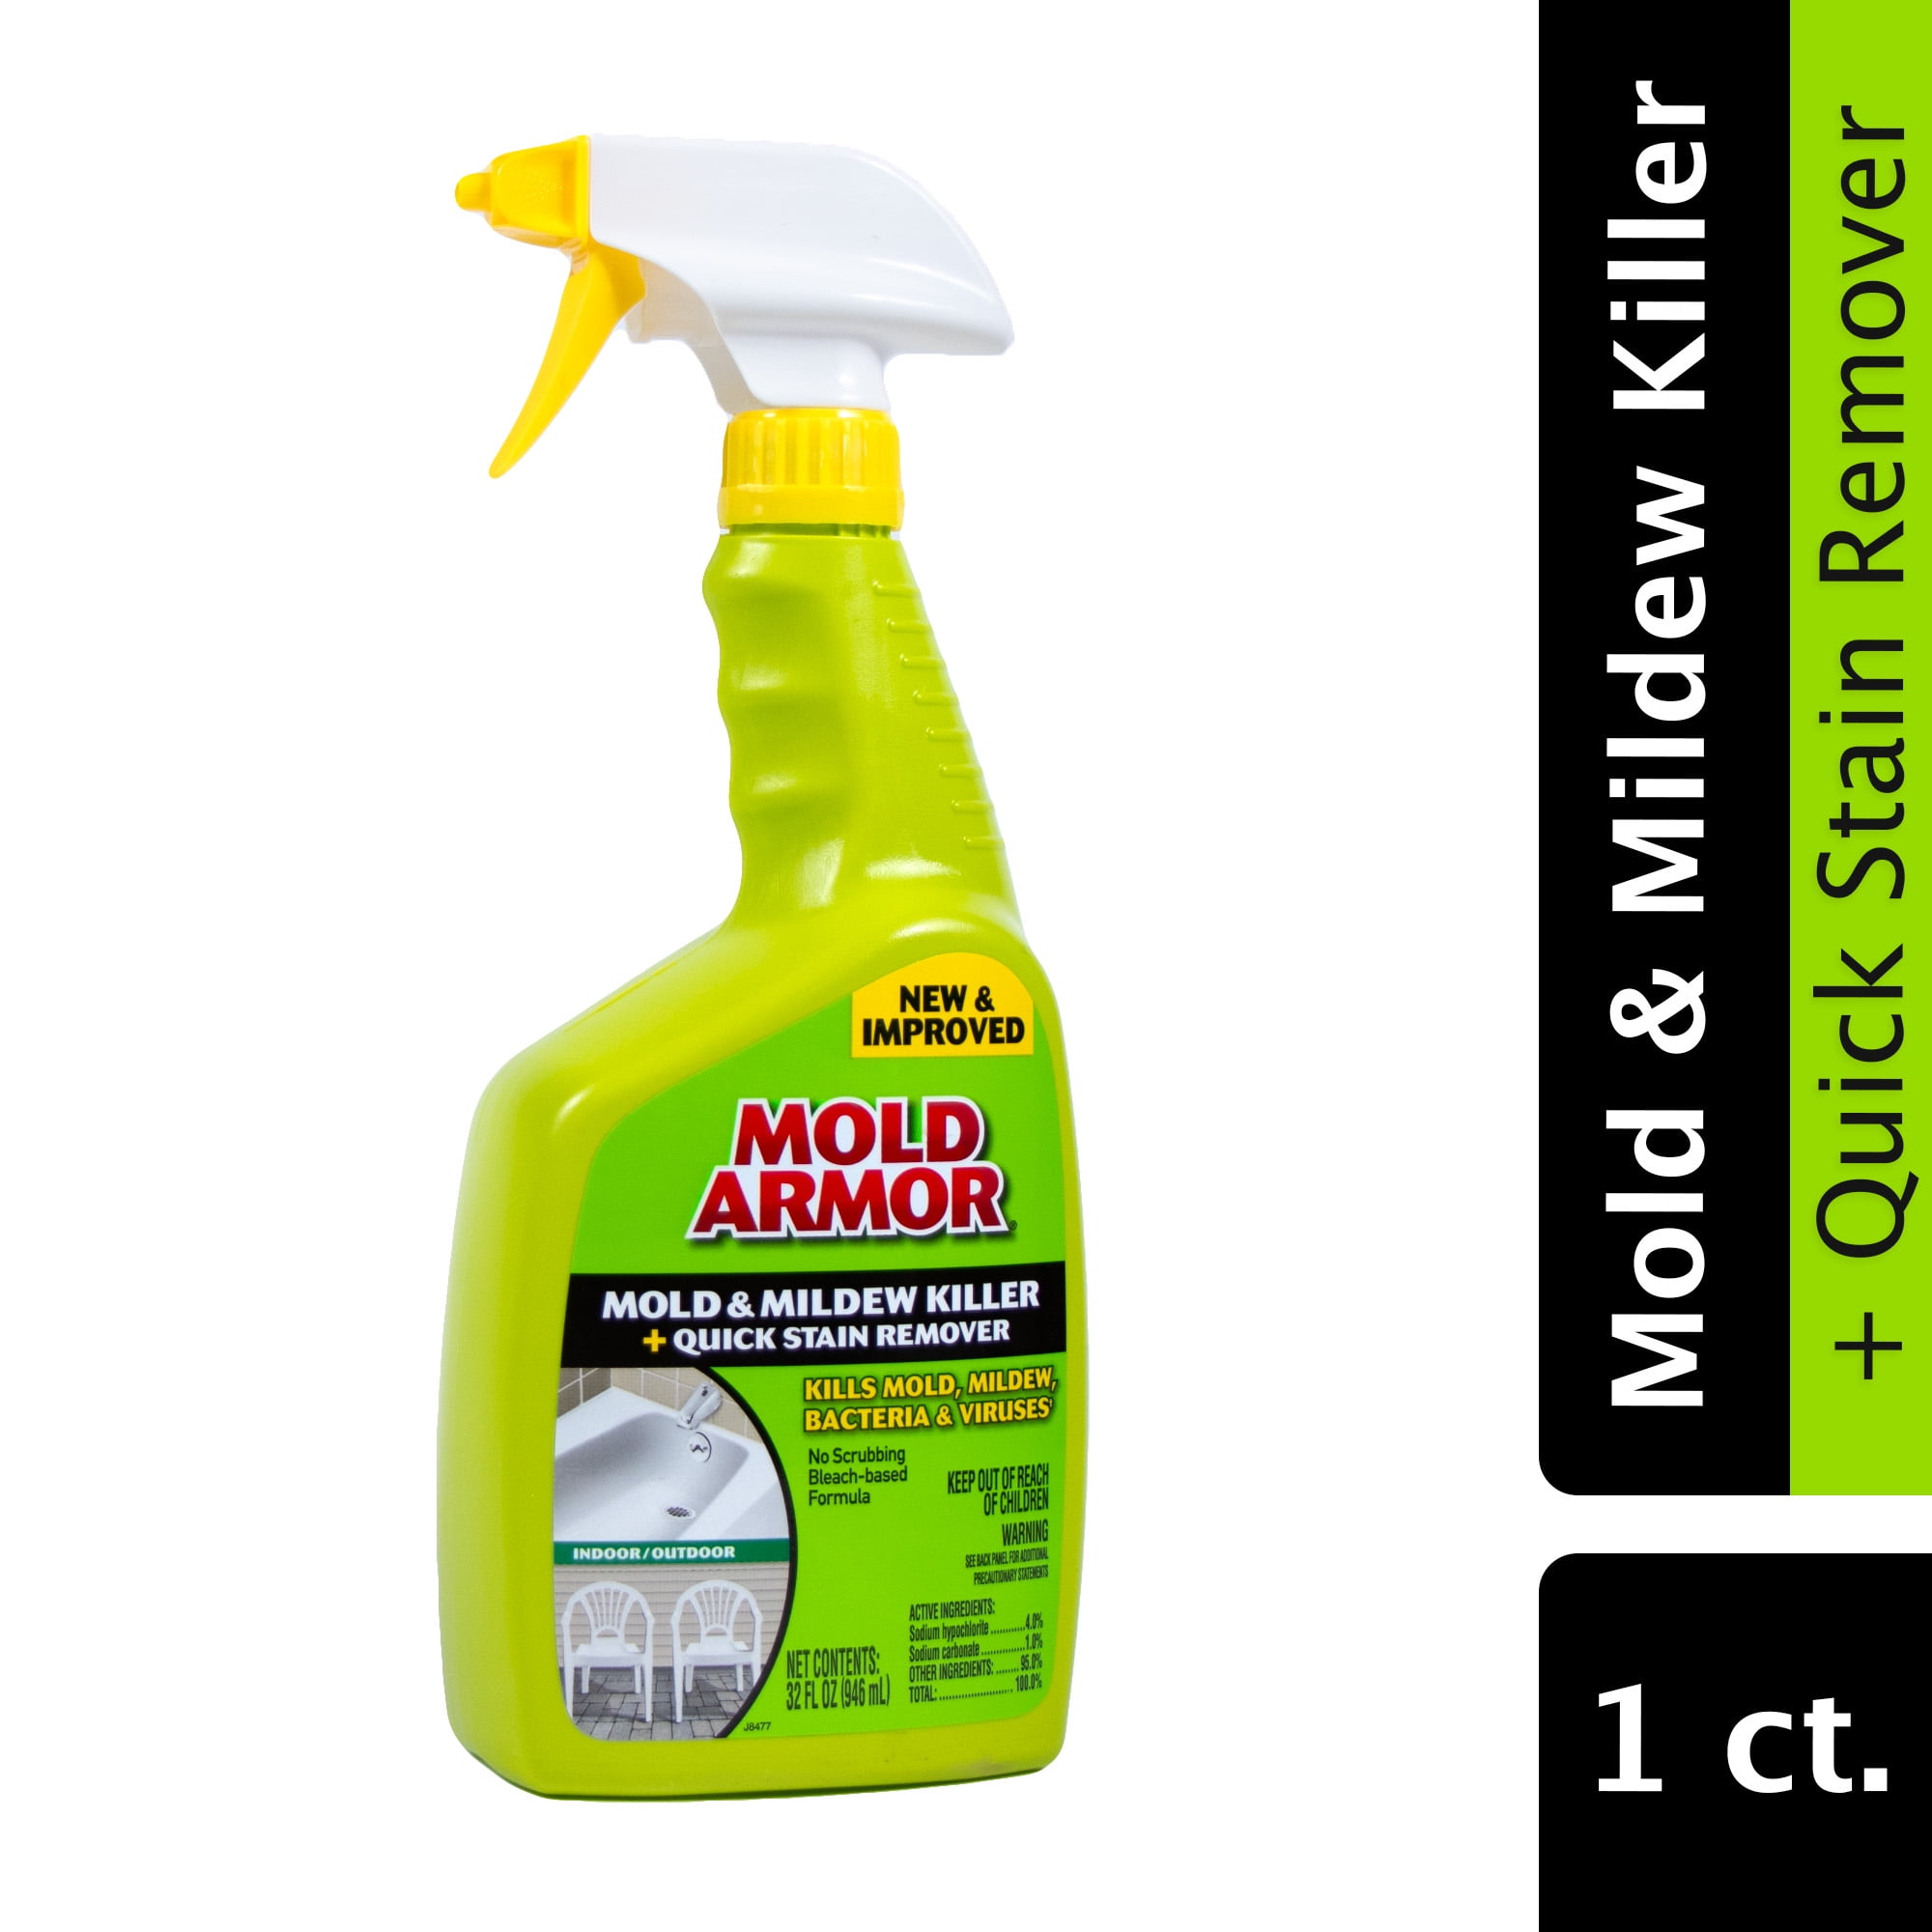 MOLD ARMOR Mold and Mildew Killer + Quick Stain Remover, 32 oz